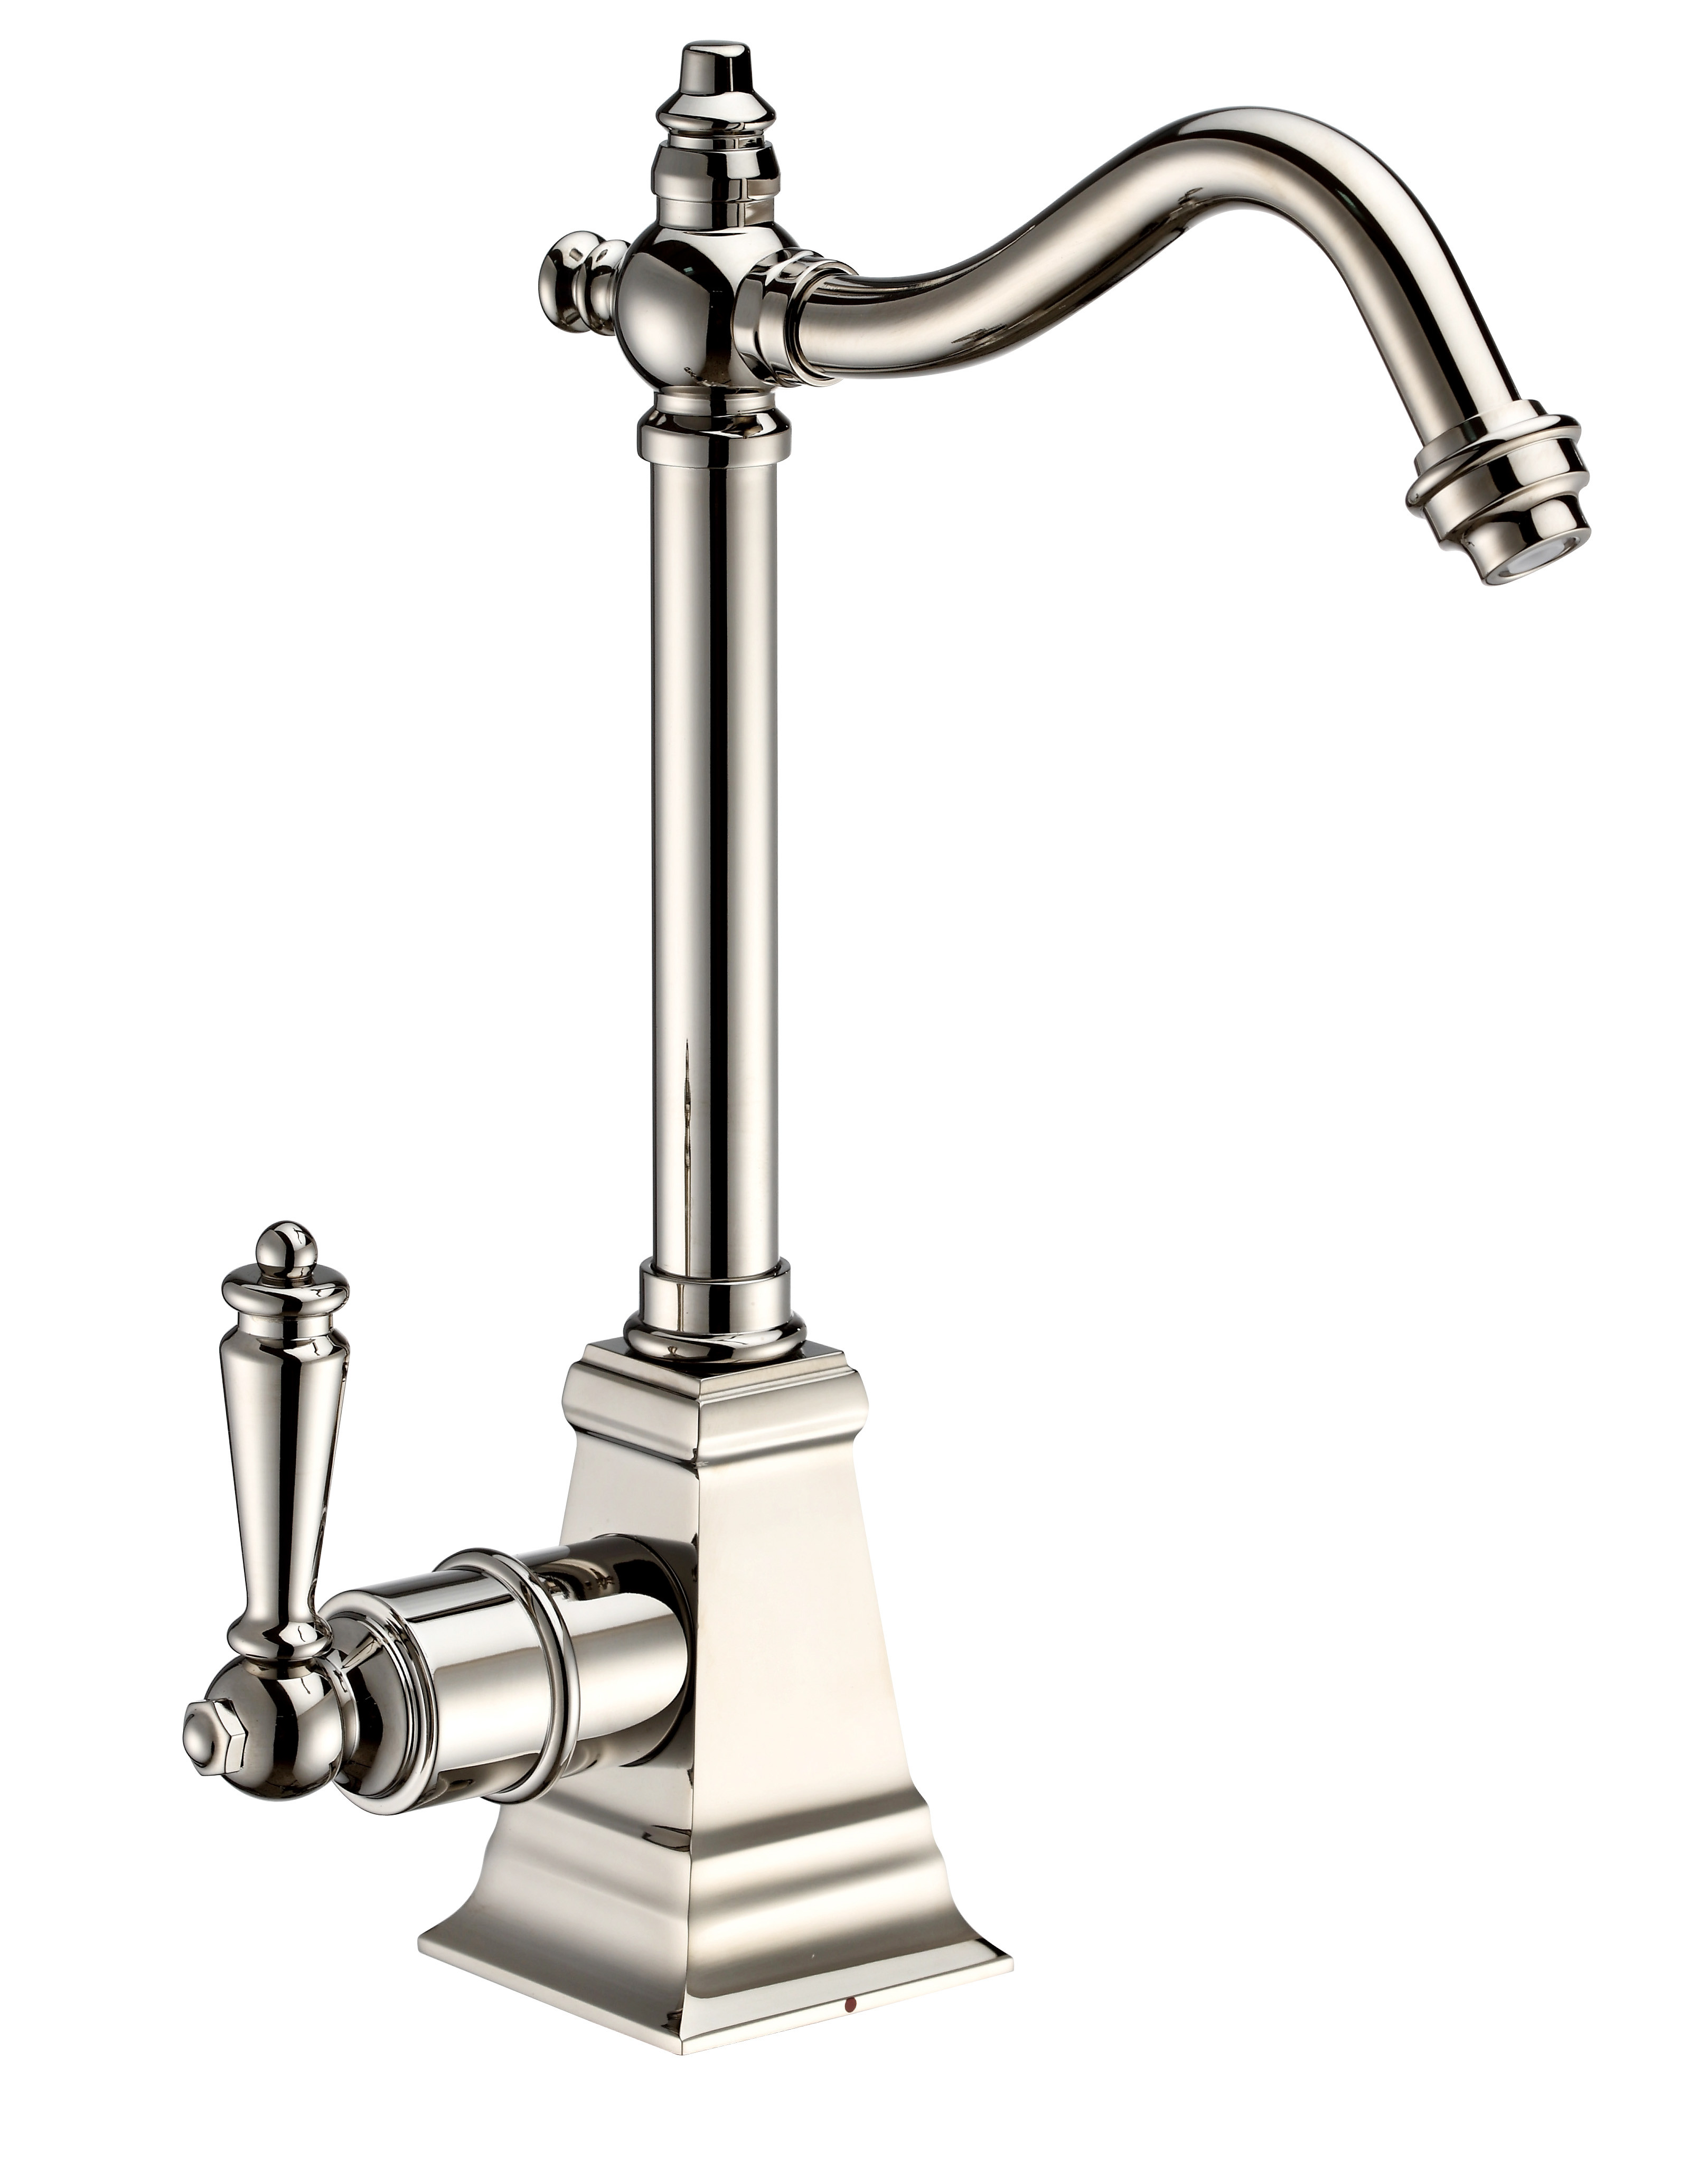 Whitehaus WHFH-H2011-PN Polished Nickel Instant Hot Water Faucet with Self Closing Handle